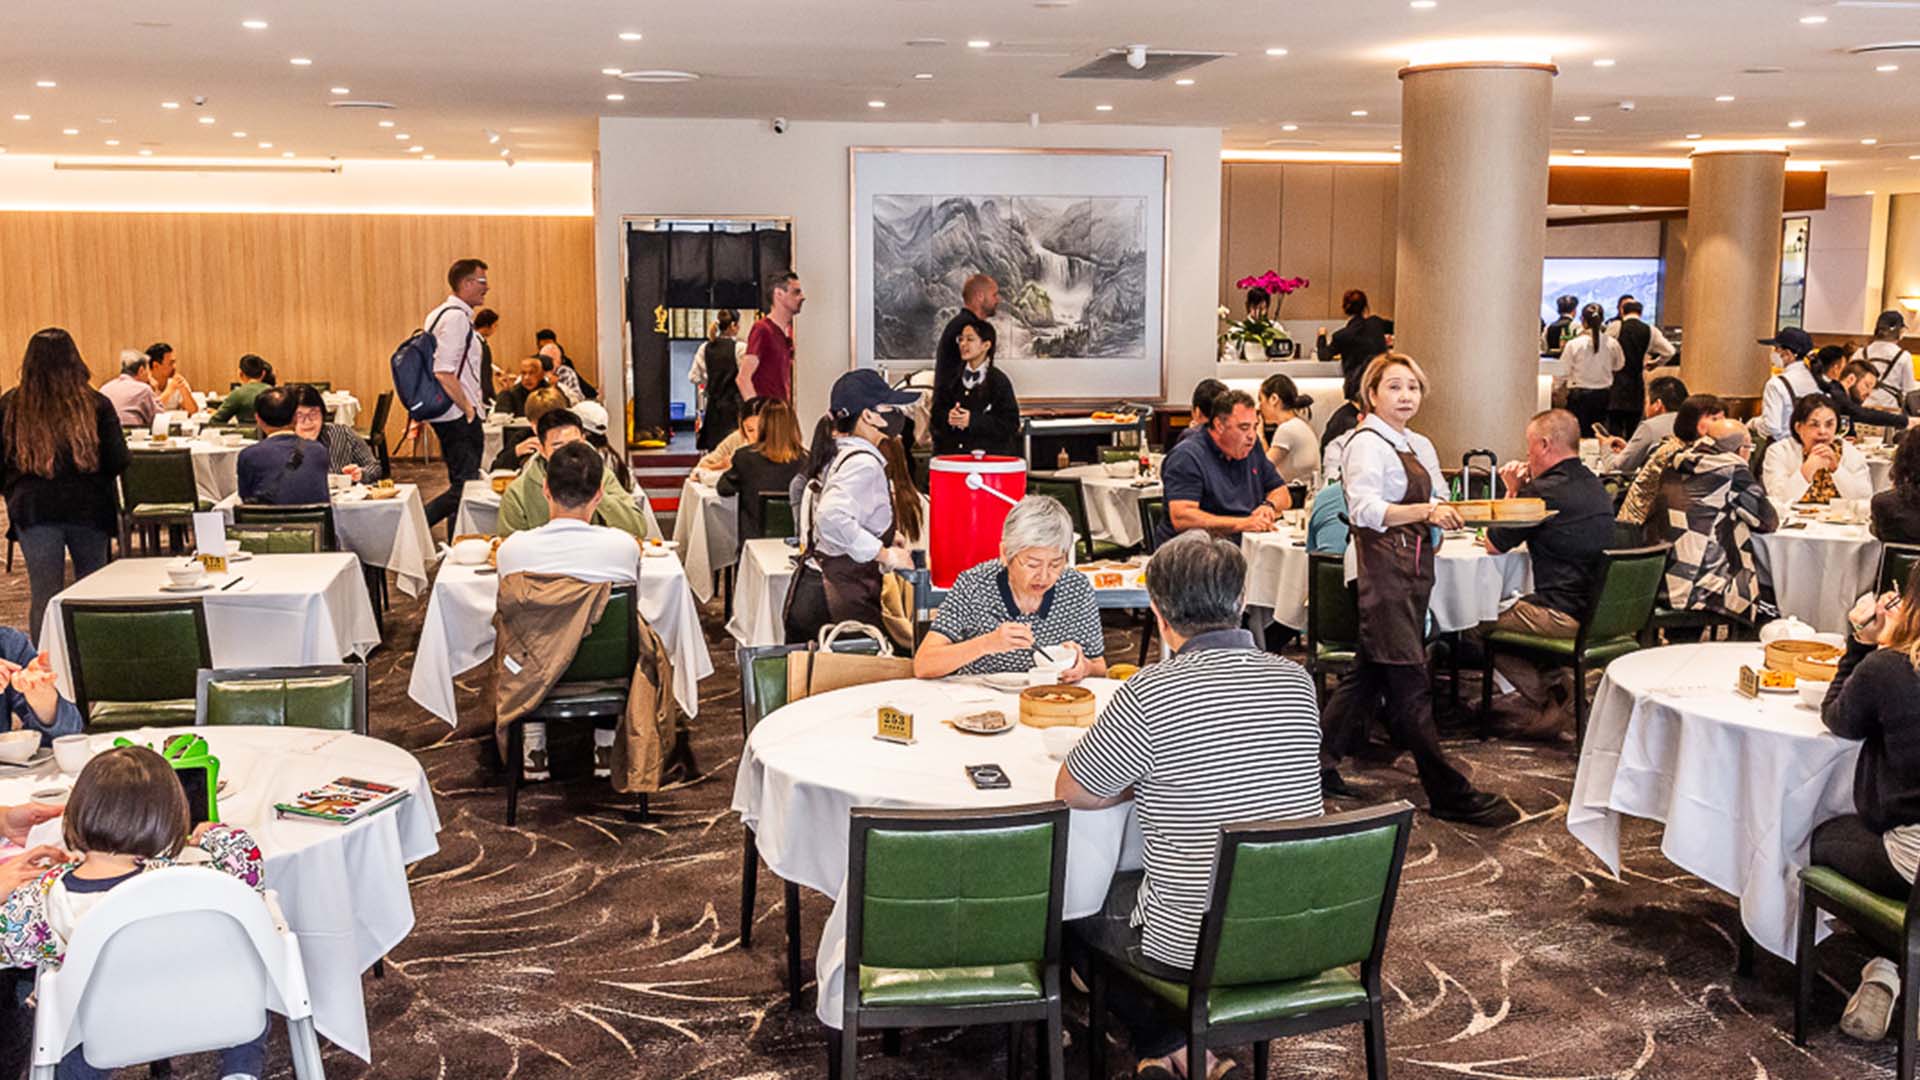 The Royal Palace Seafood Restaurant Is the Huge New Yum Cha Restaurant in the Old Golden Century Site